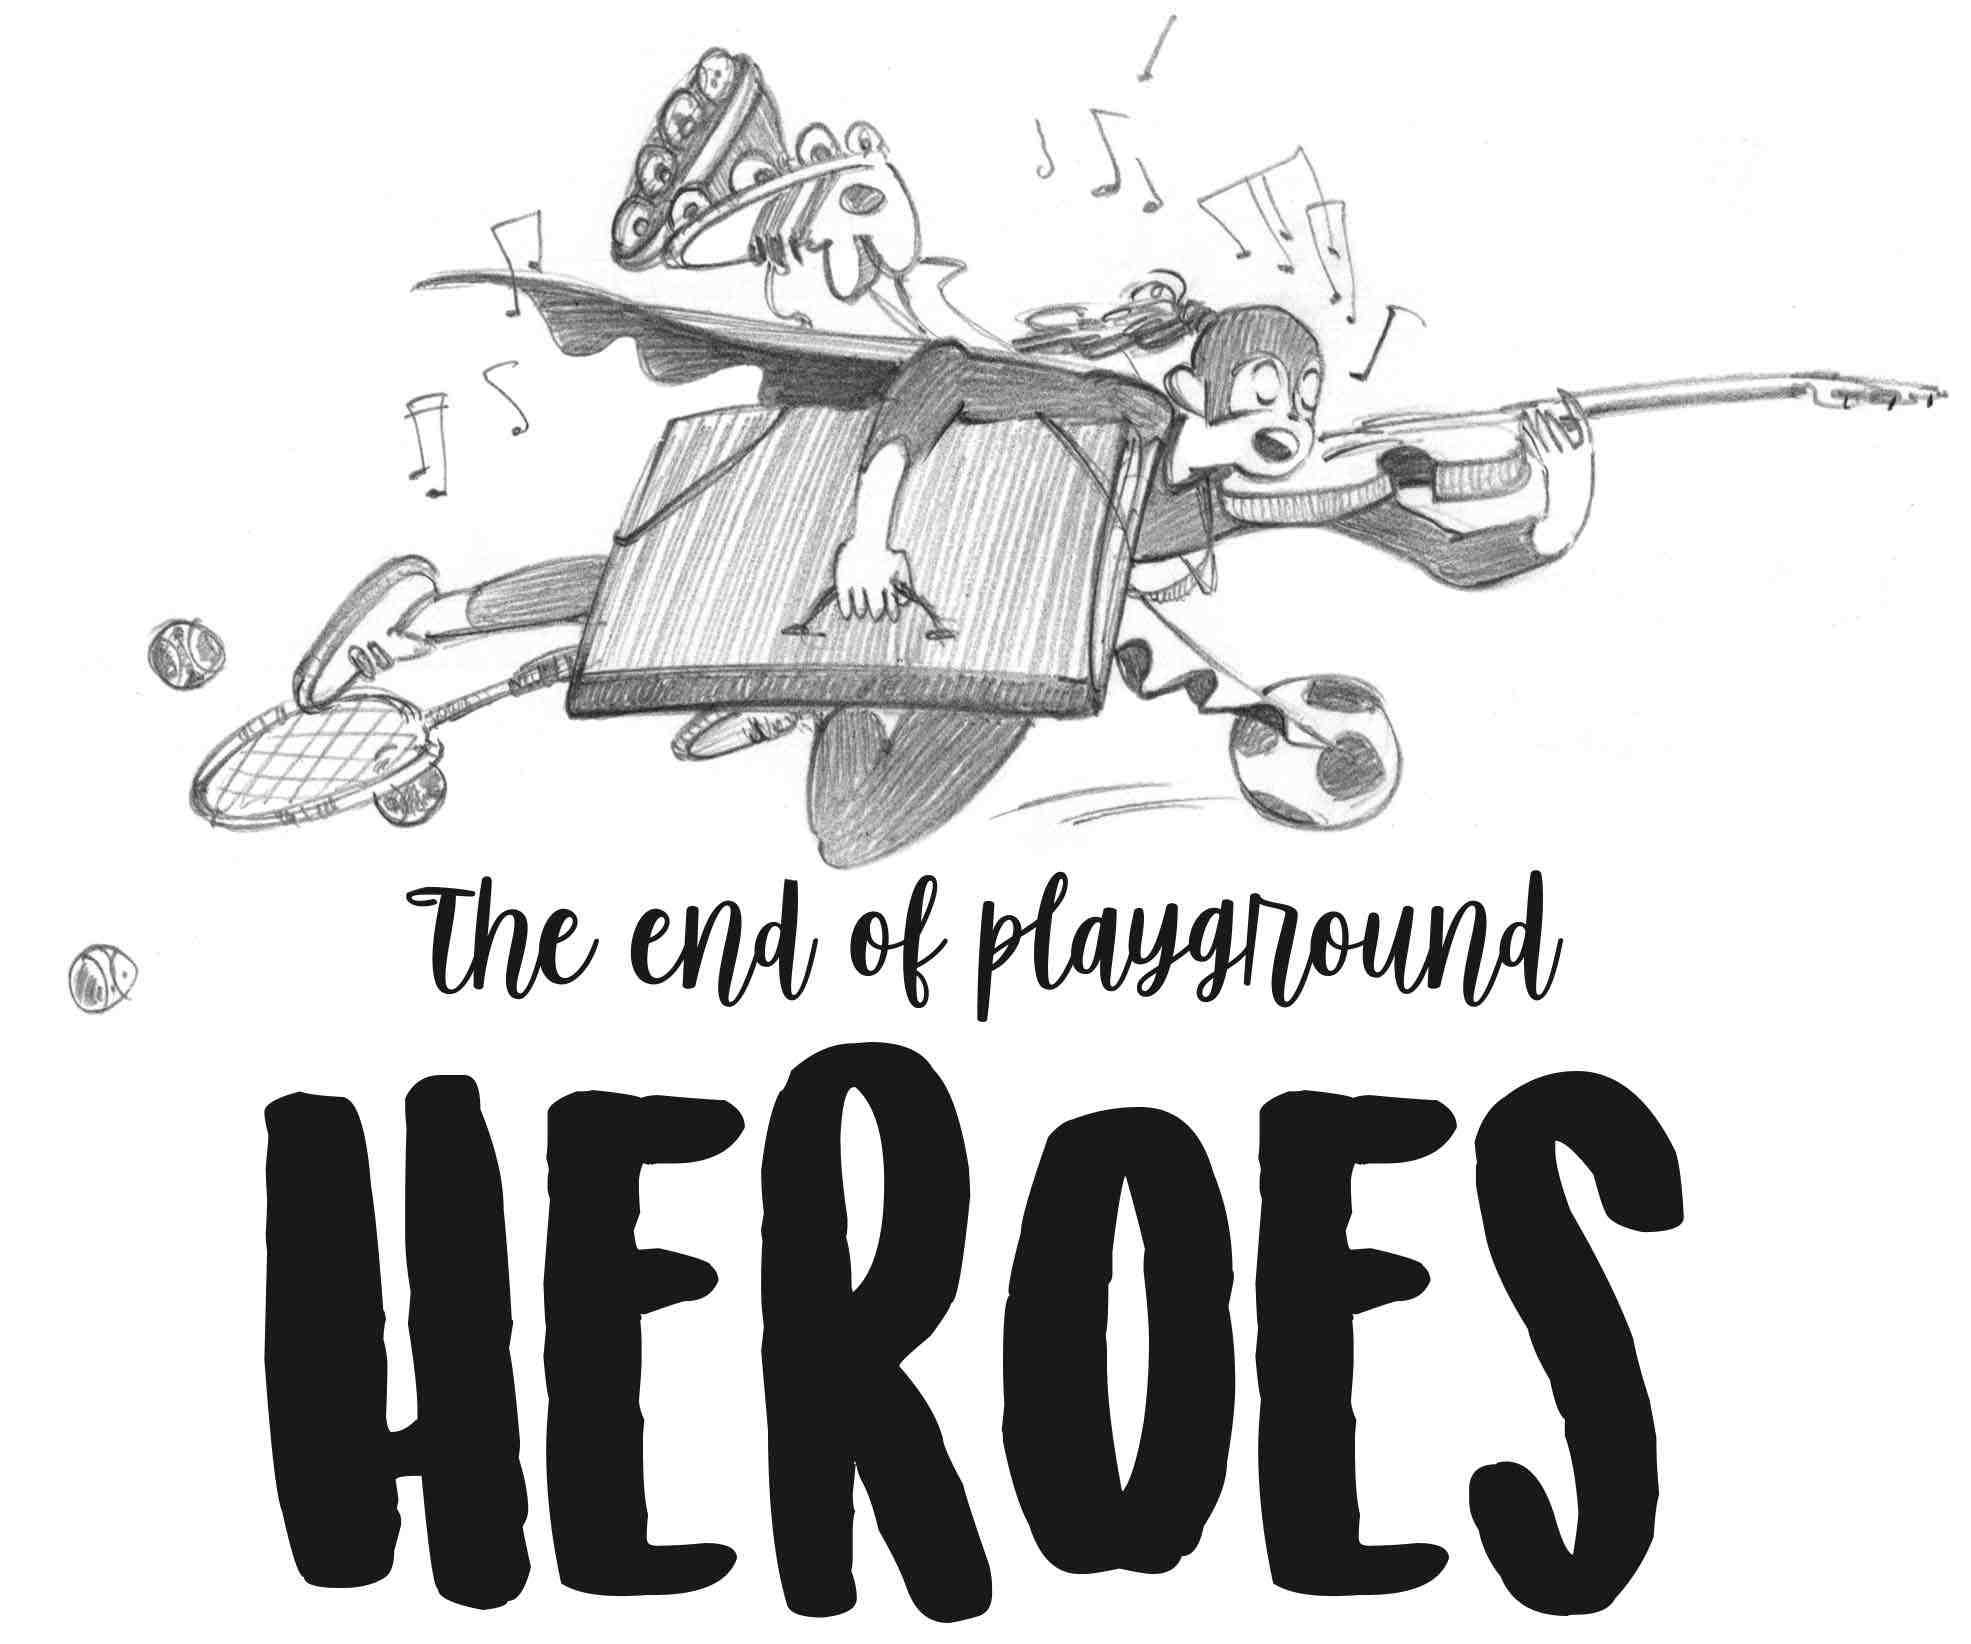 The End of Playground Heroes